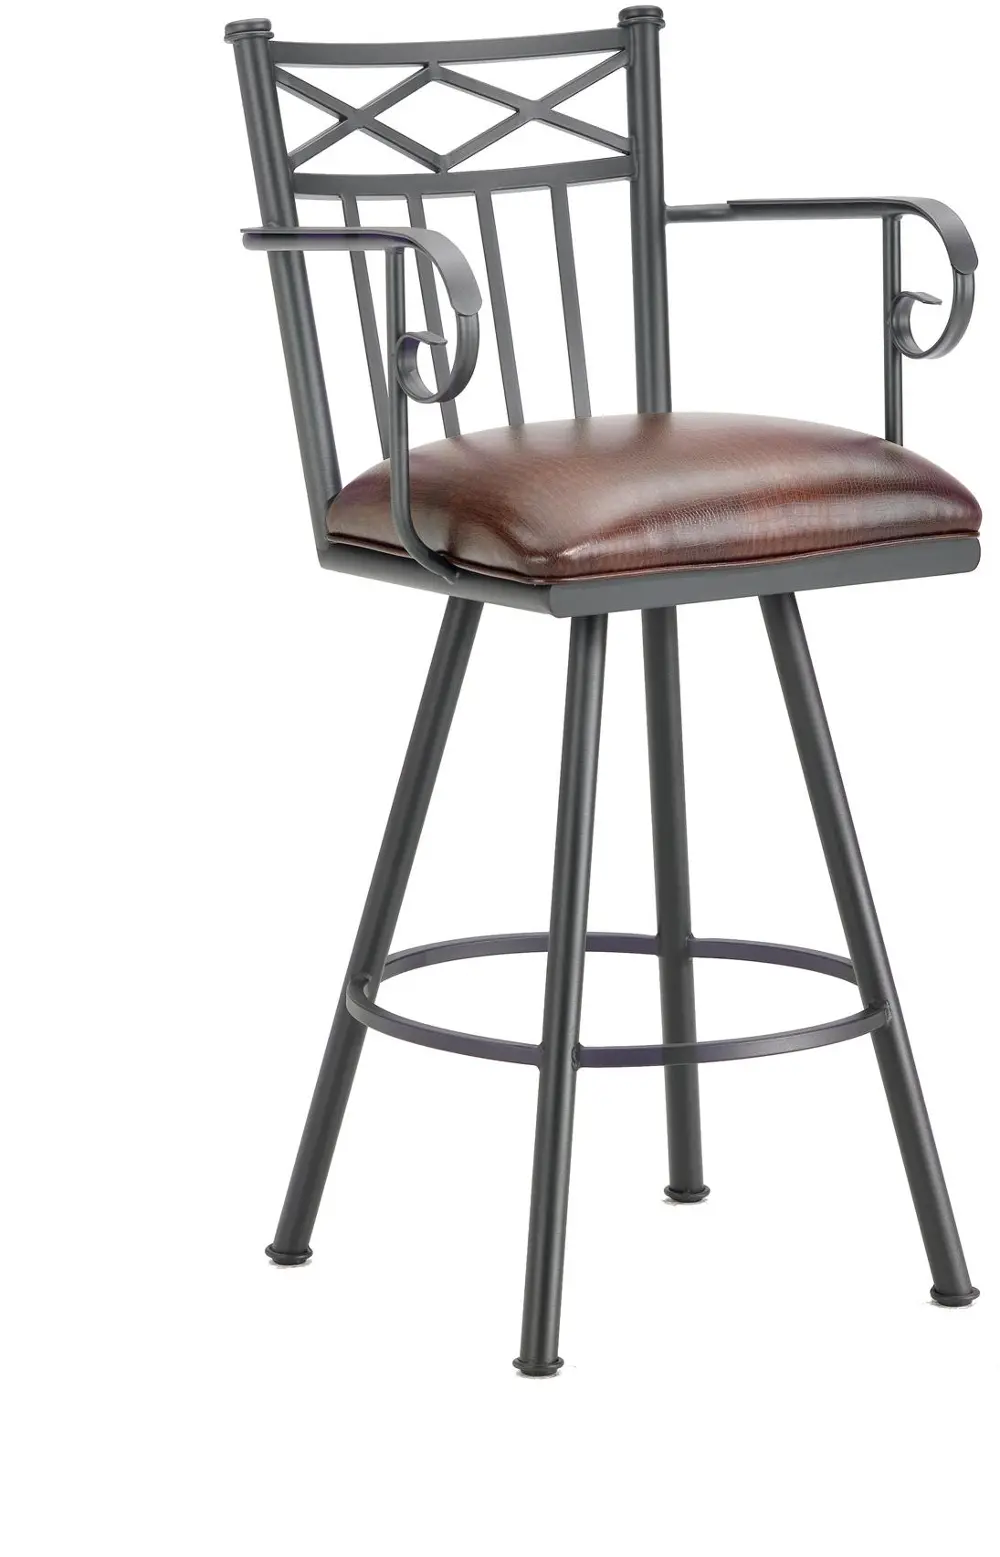 Brown and Black Metal Swivel Counter Height Stool with Arms- Alexander-1